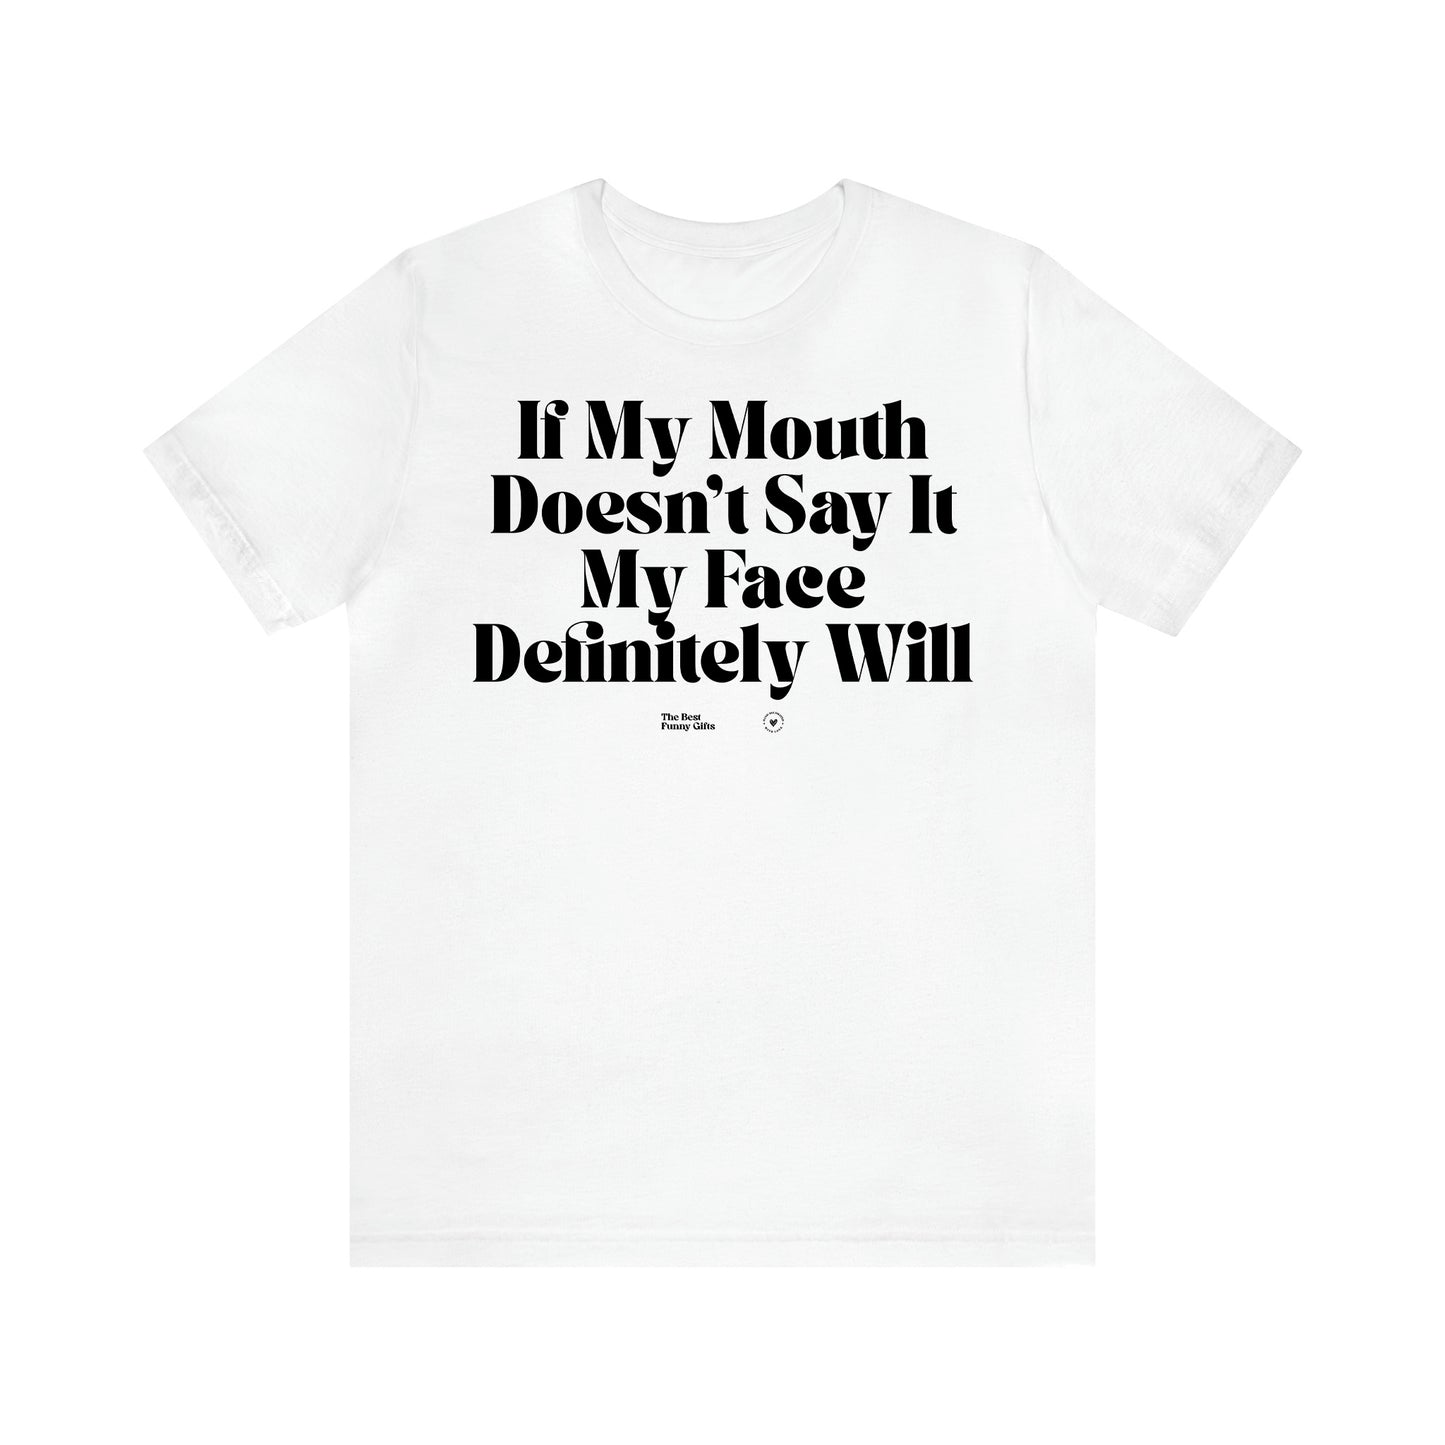 Women's T Shirts If My Mouth Doesn't Say It My Face Definitely Will - The Best Funny Gifts